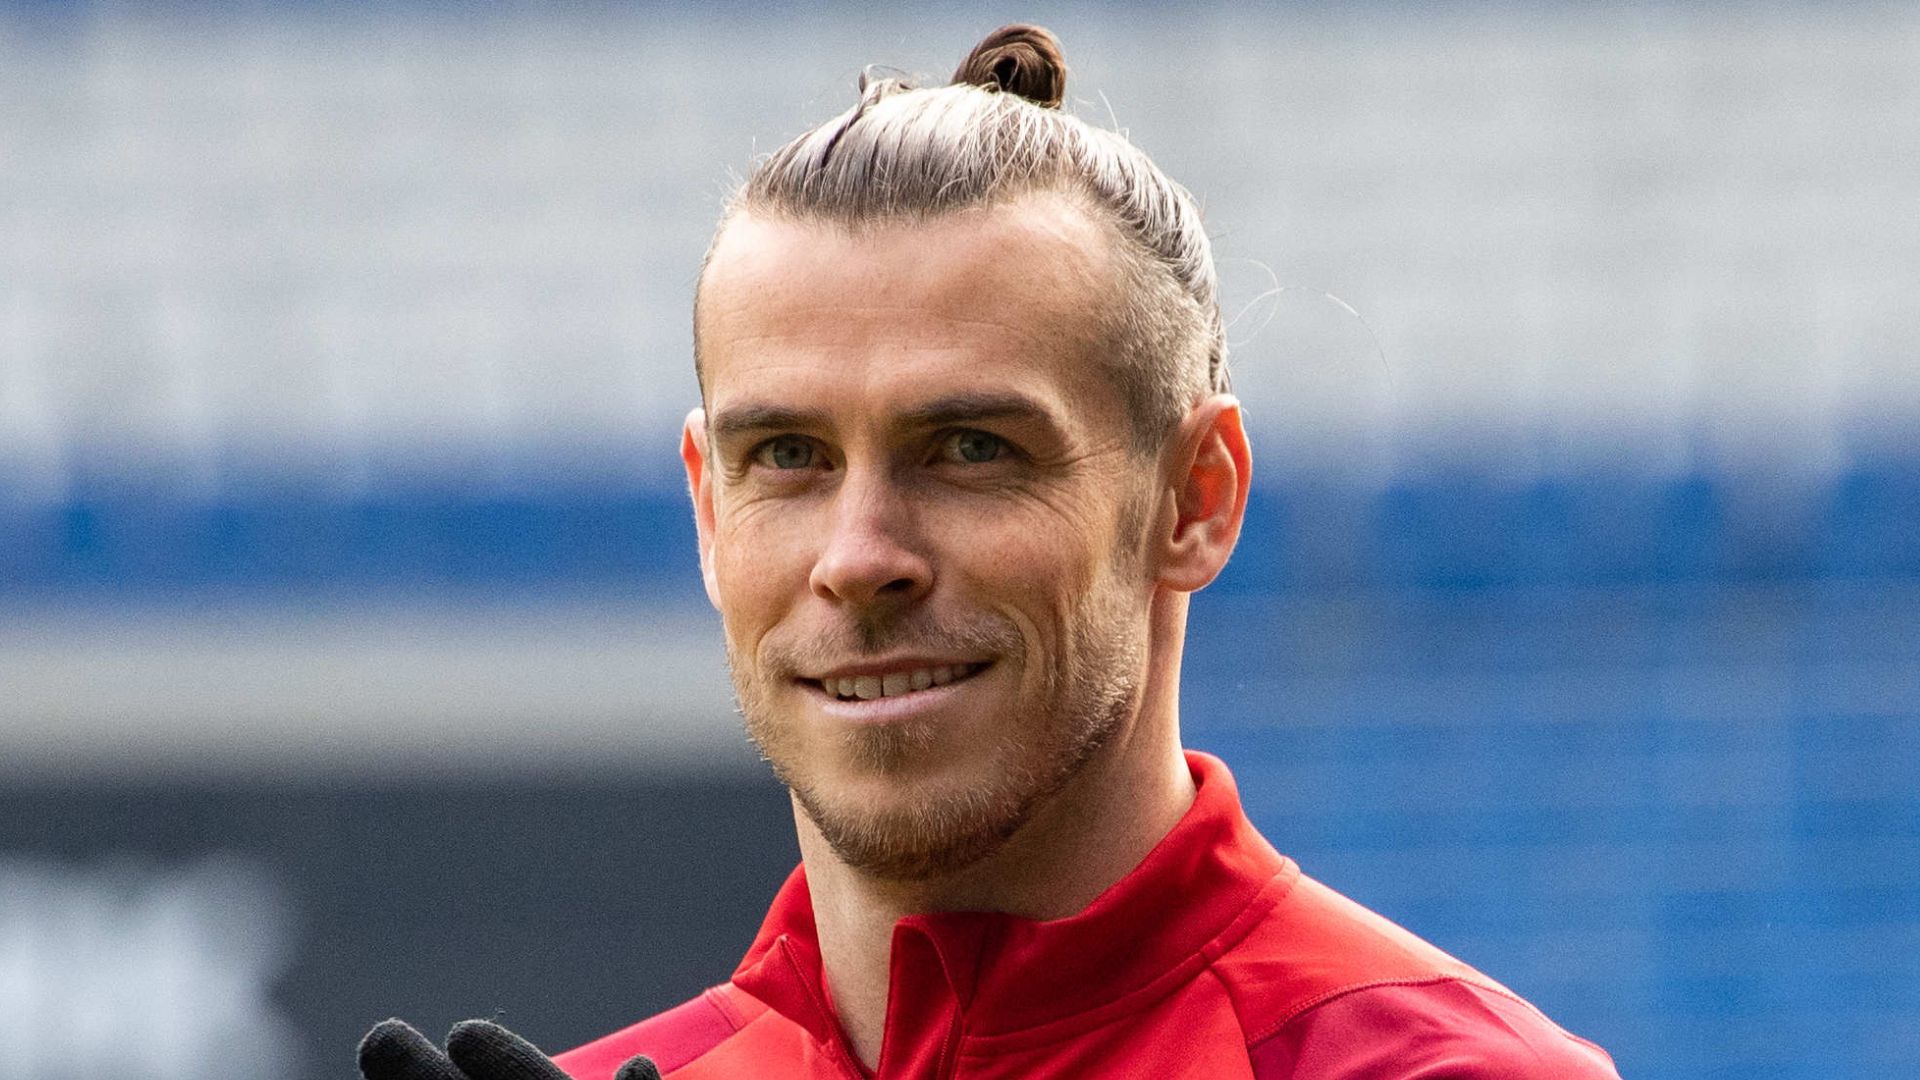 Gareth Bale unfurls famous man bun in the middle of Real Madrid